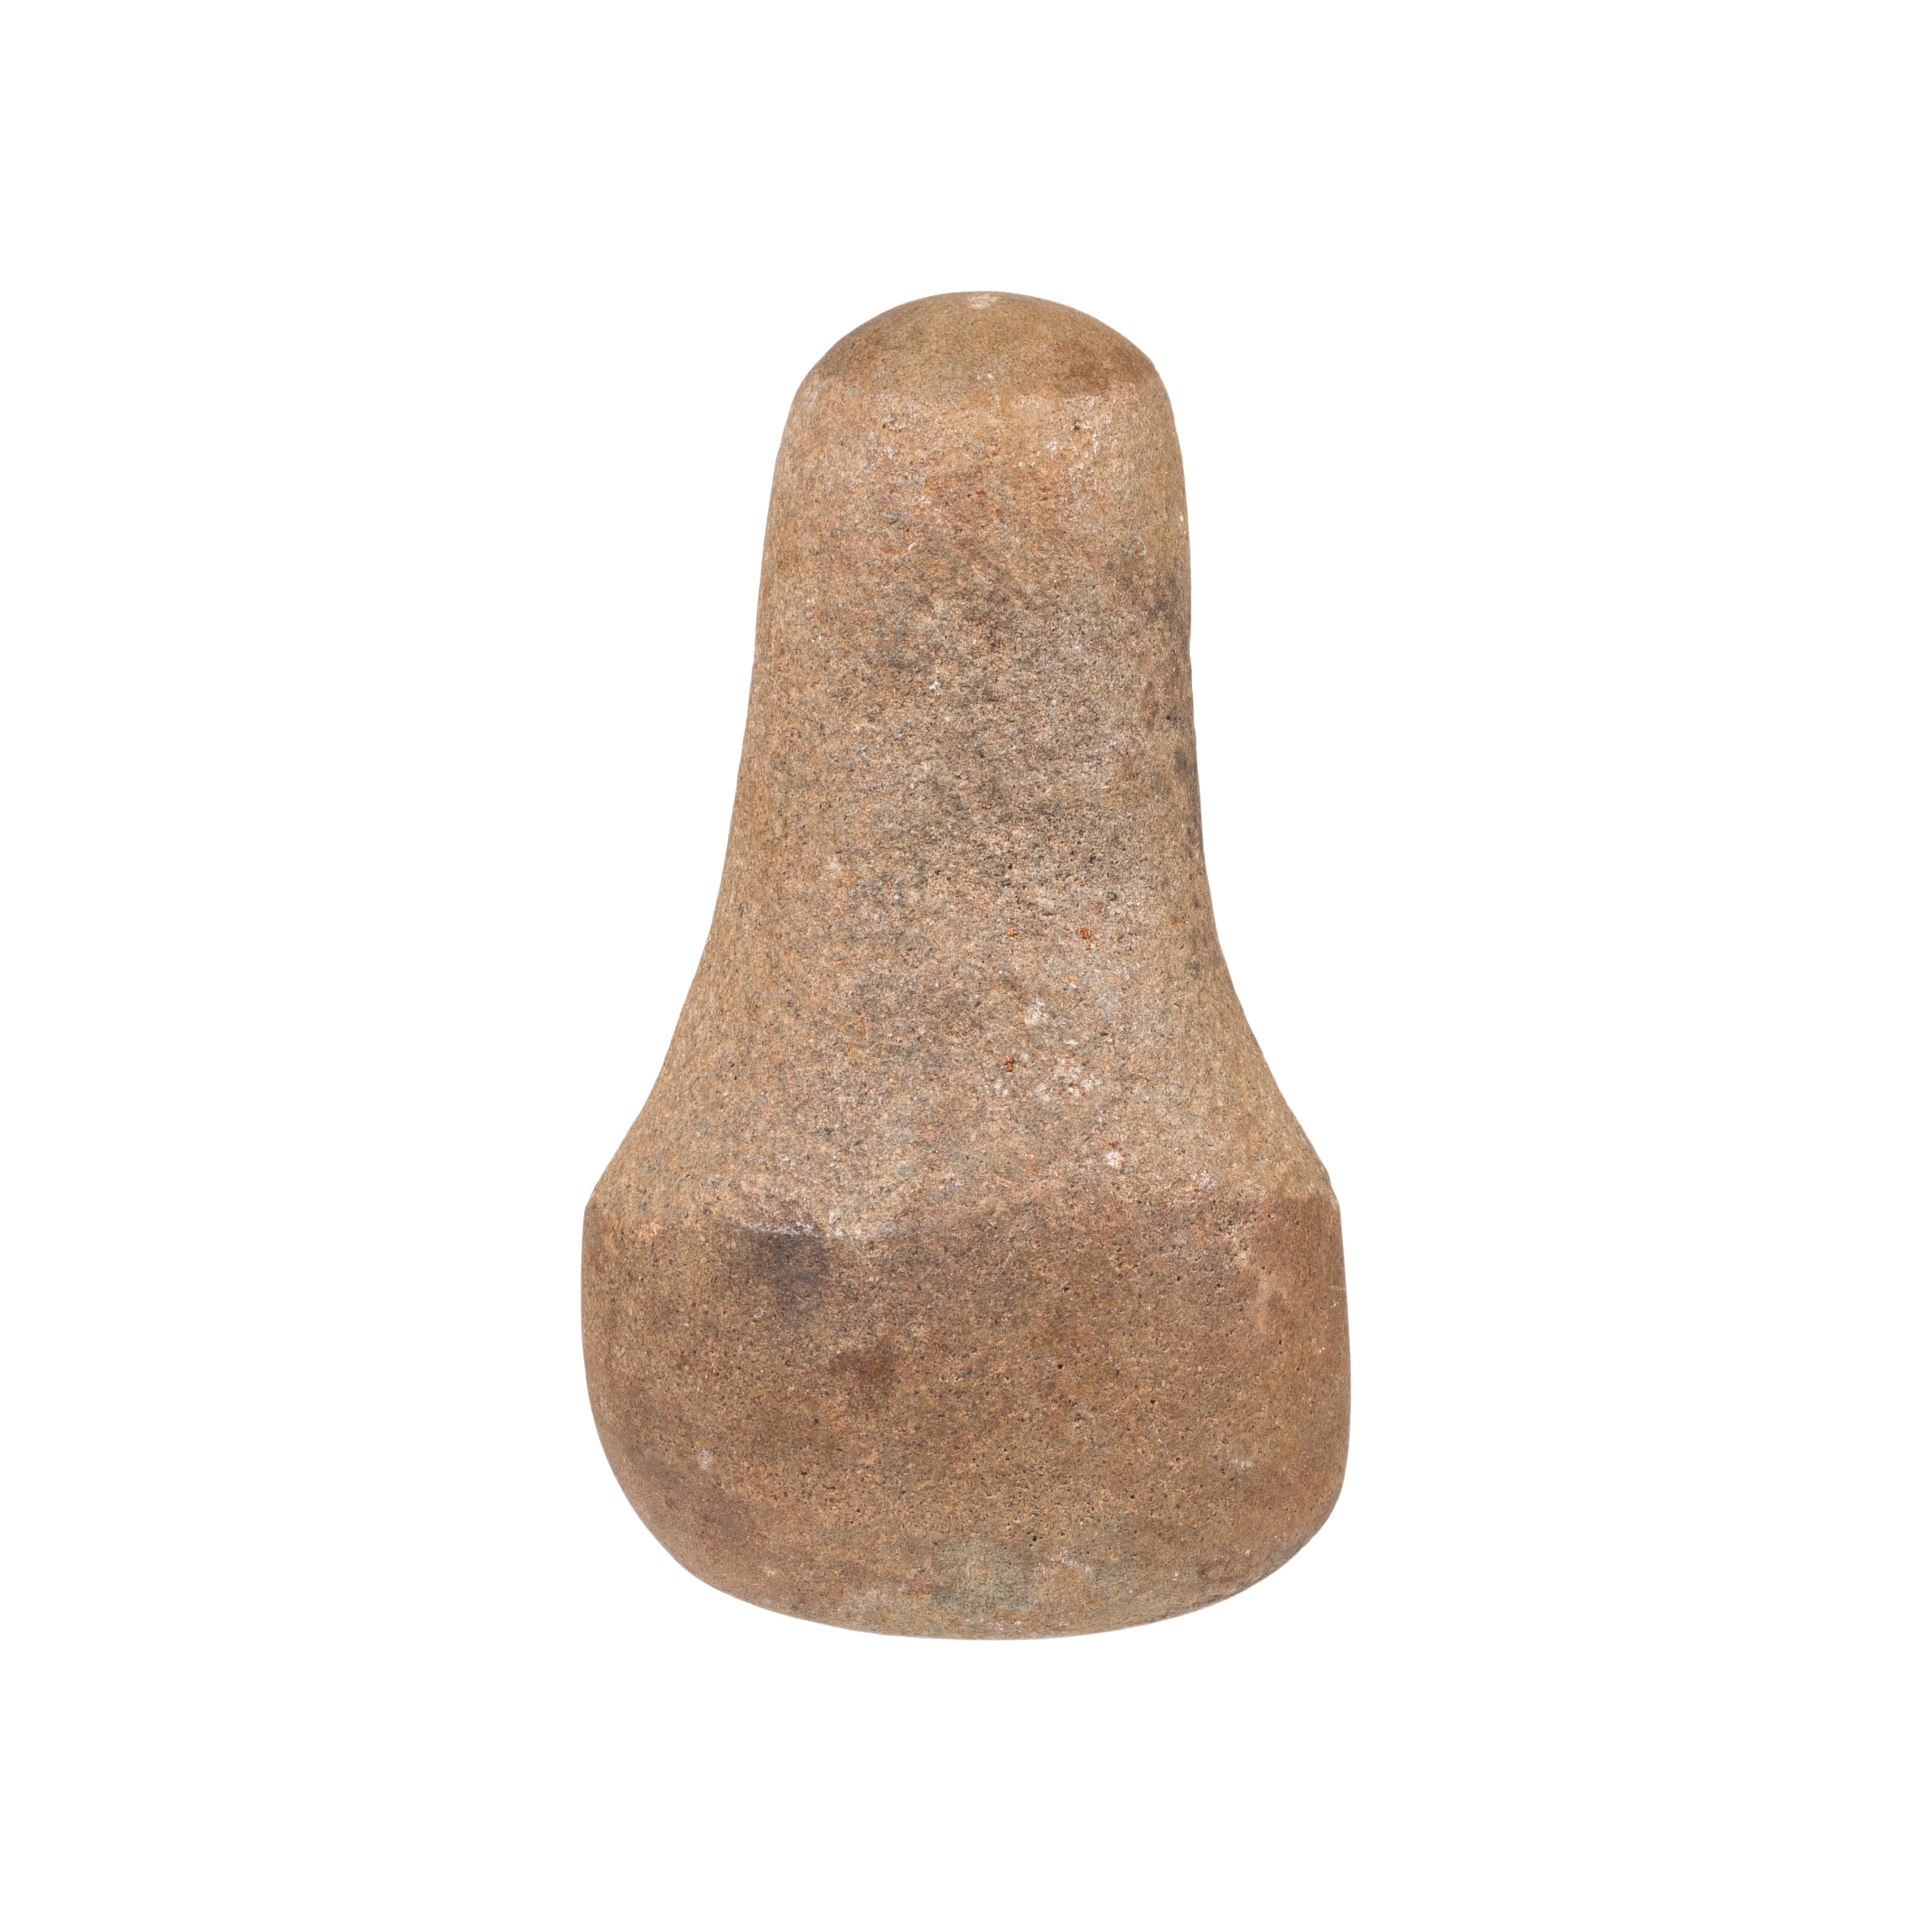 Bell Shaped Stone Pestle